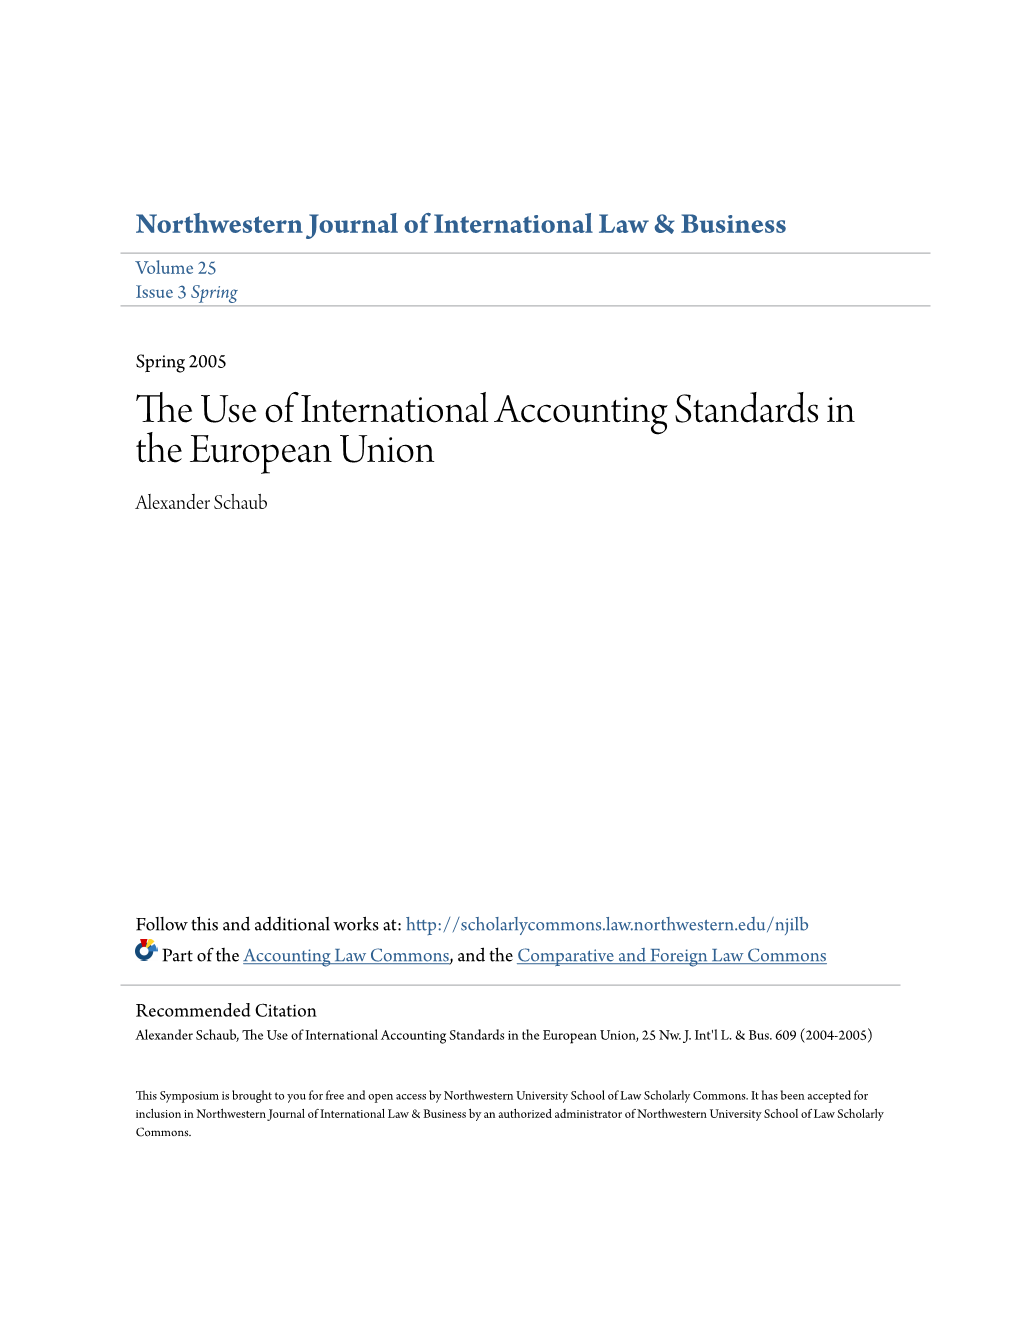 The Use of International Accounting Standards in the European Union